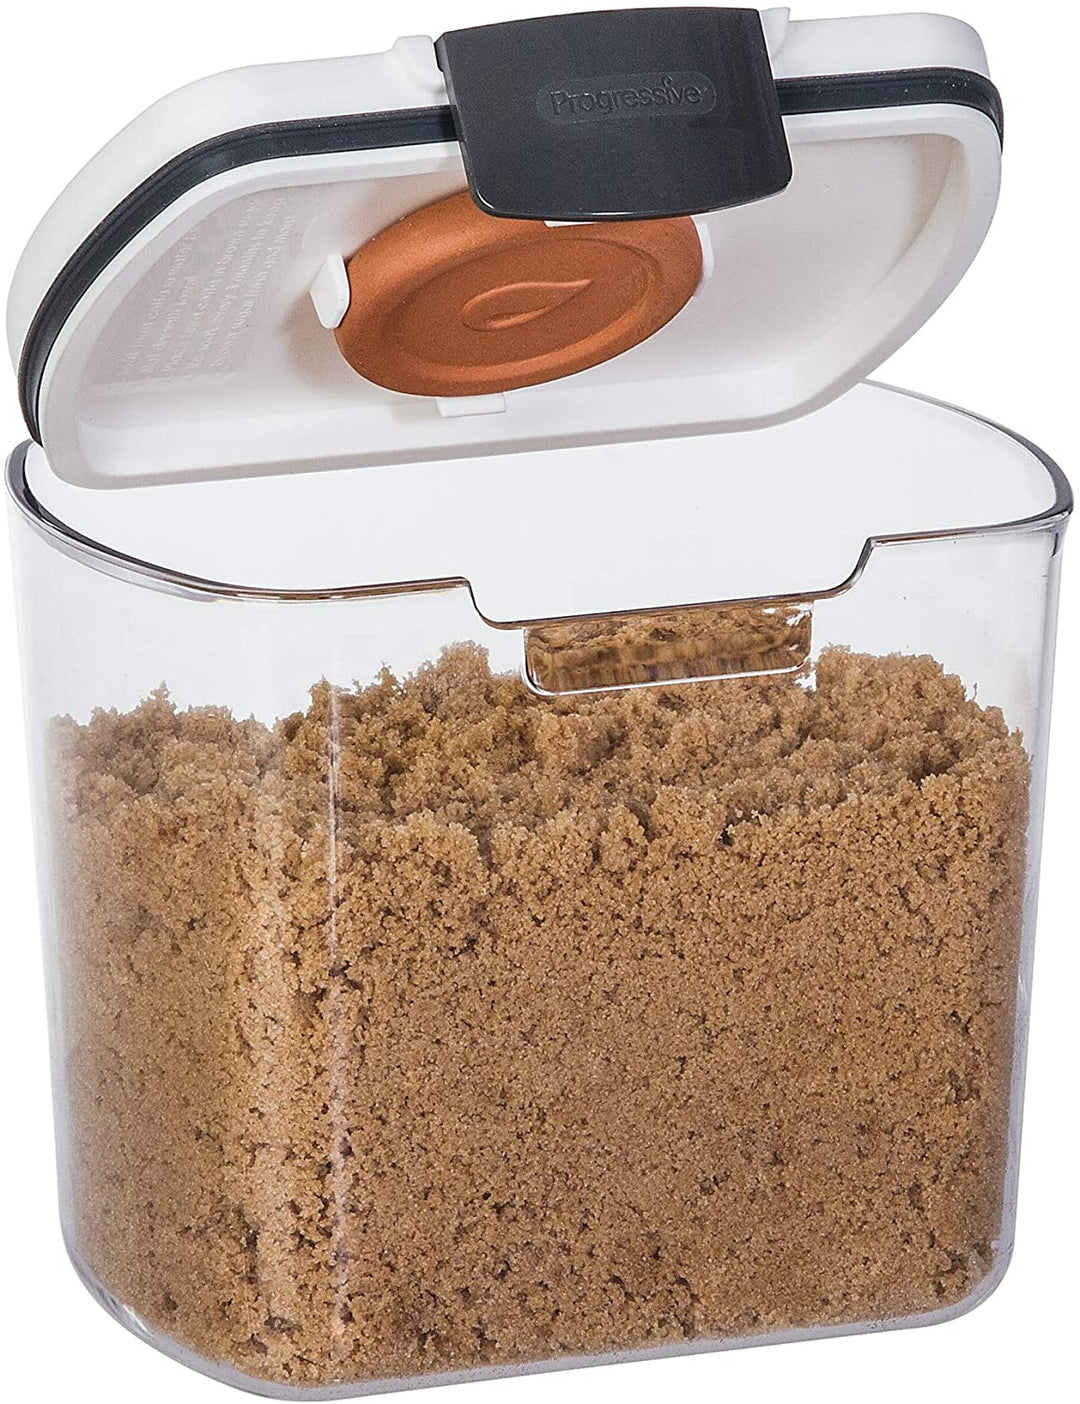 Prokeeper + Container, Brown Sugar, 1.55 Quart